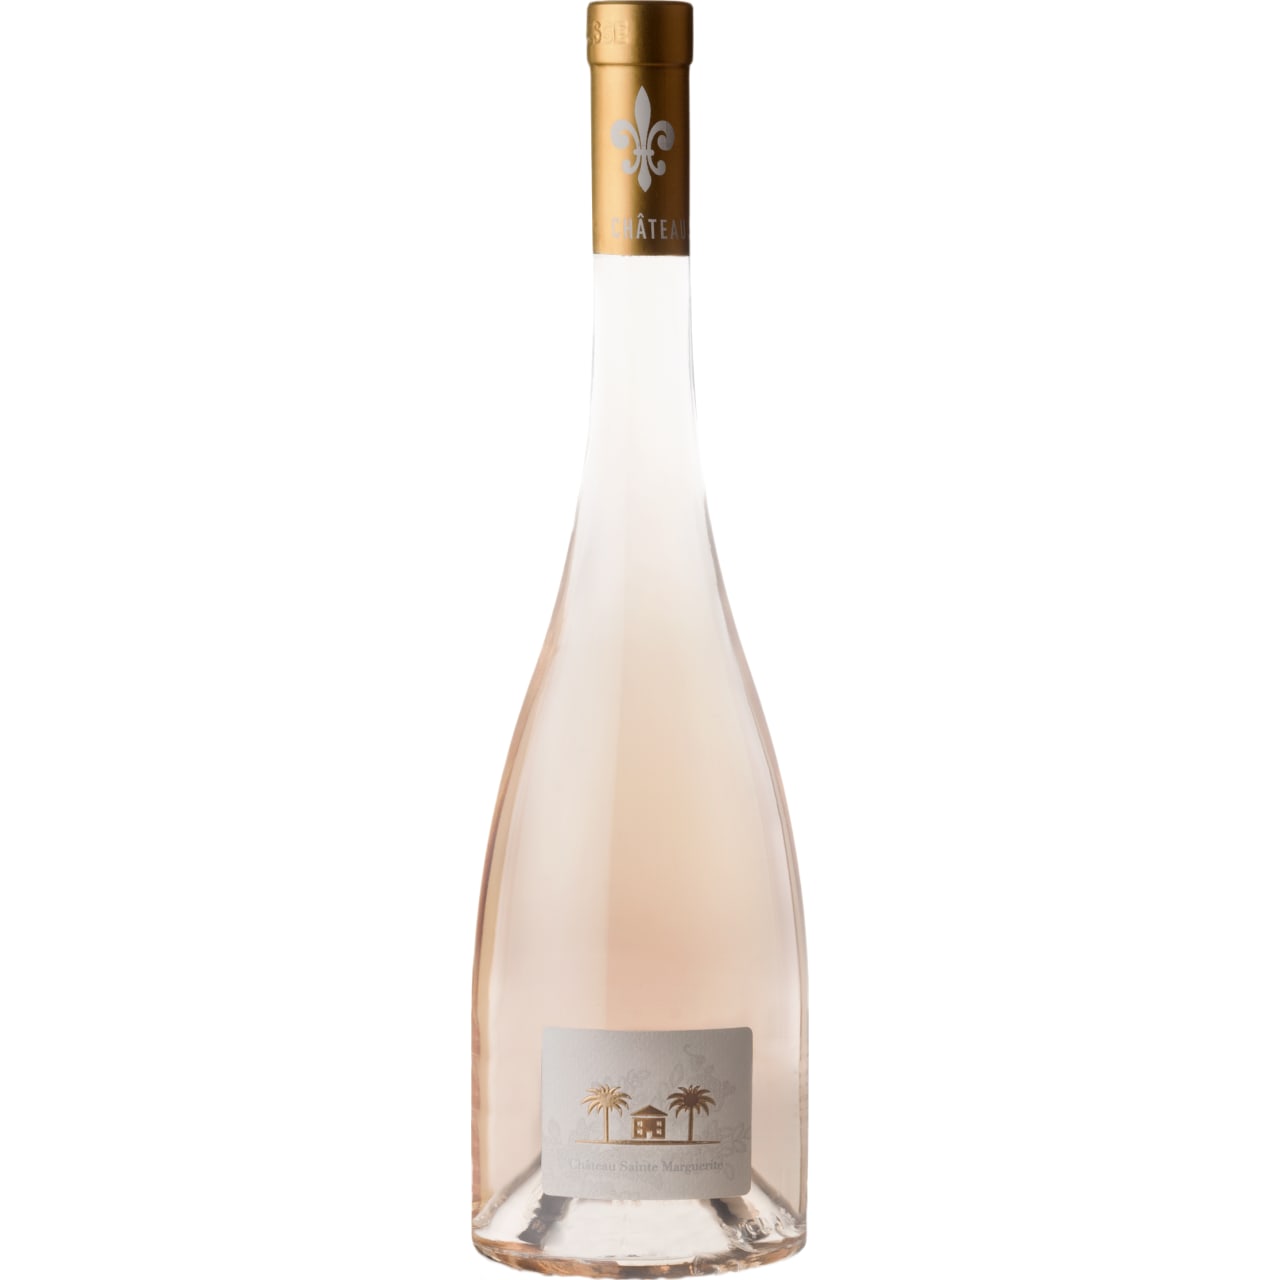 This stunner from Château Sainte Marguerite is one of the ultimate expressions of this famous region's rosé wines.